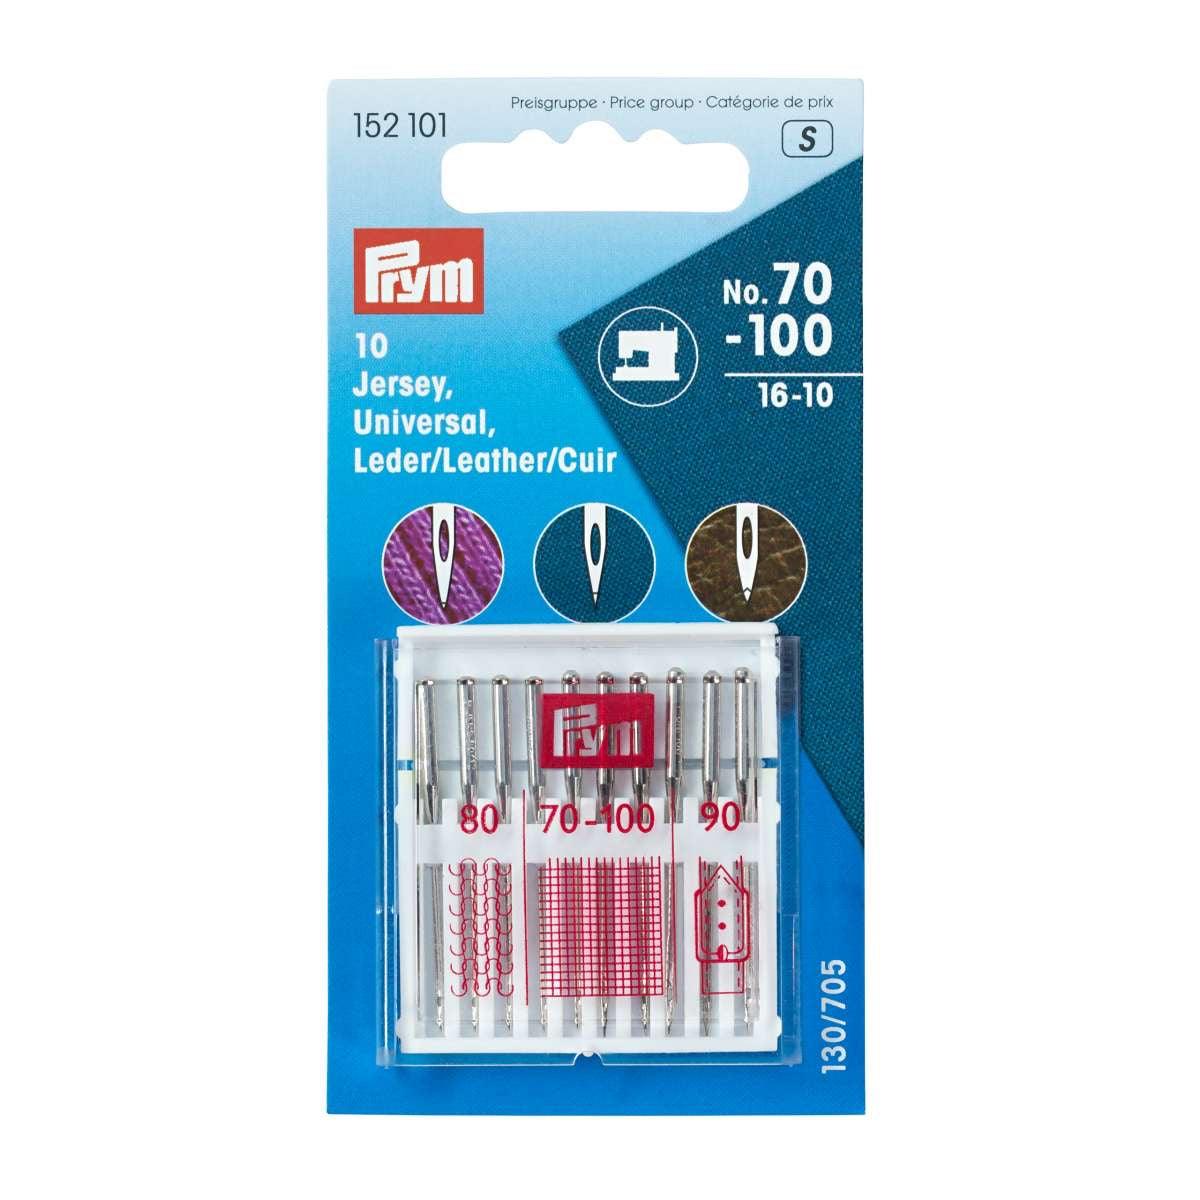 Standard/Leather/Jersey sewing machine needles, 130/705, 70-100, assorted